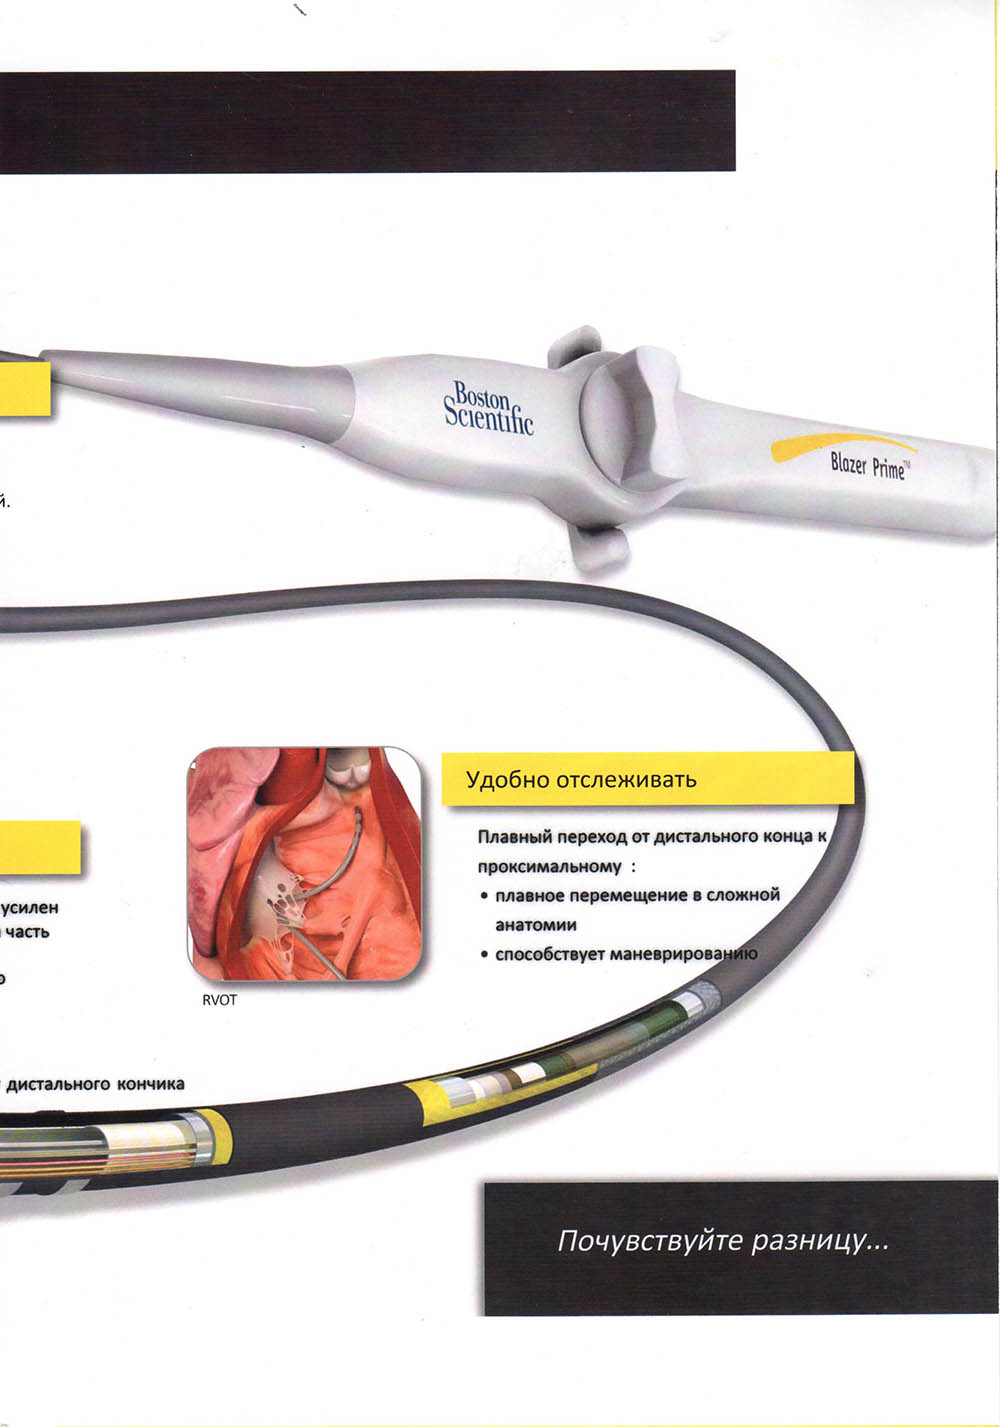 Thermal ablation catheters